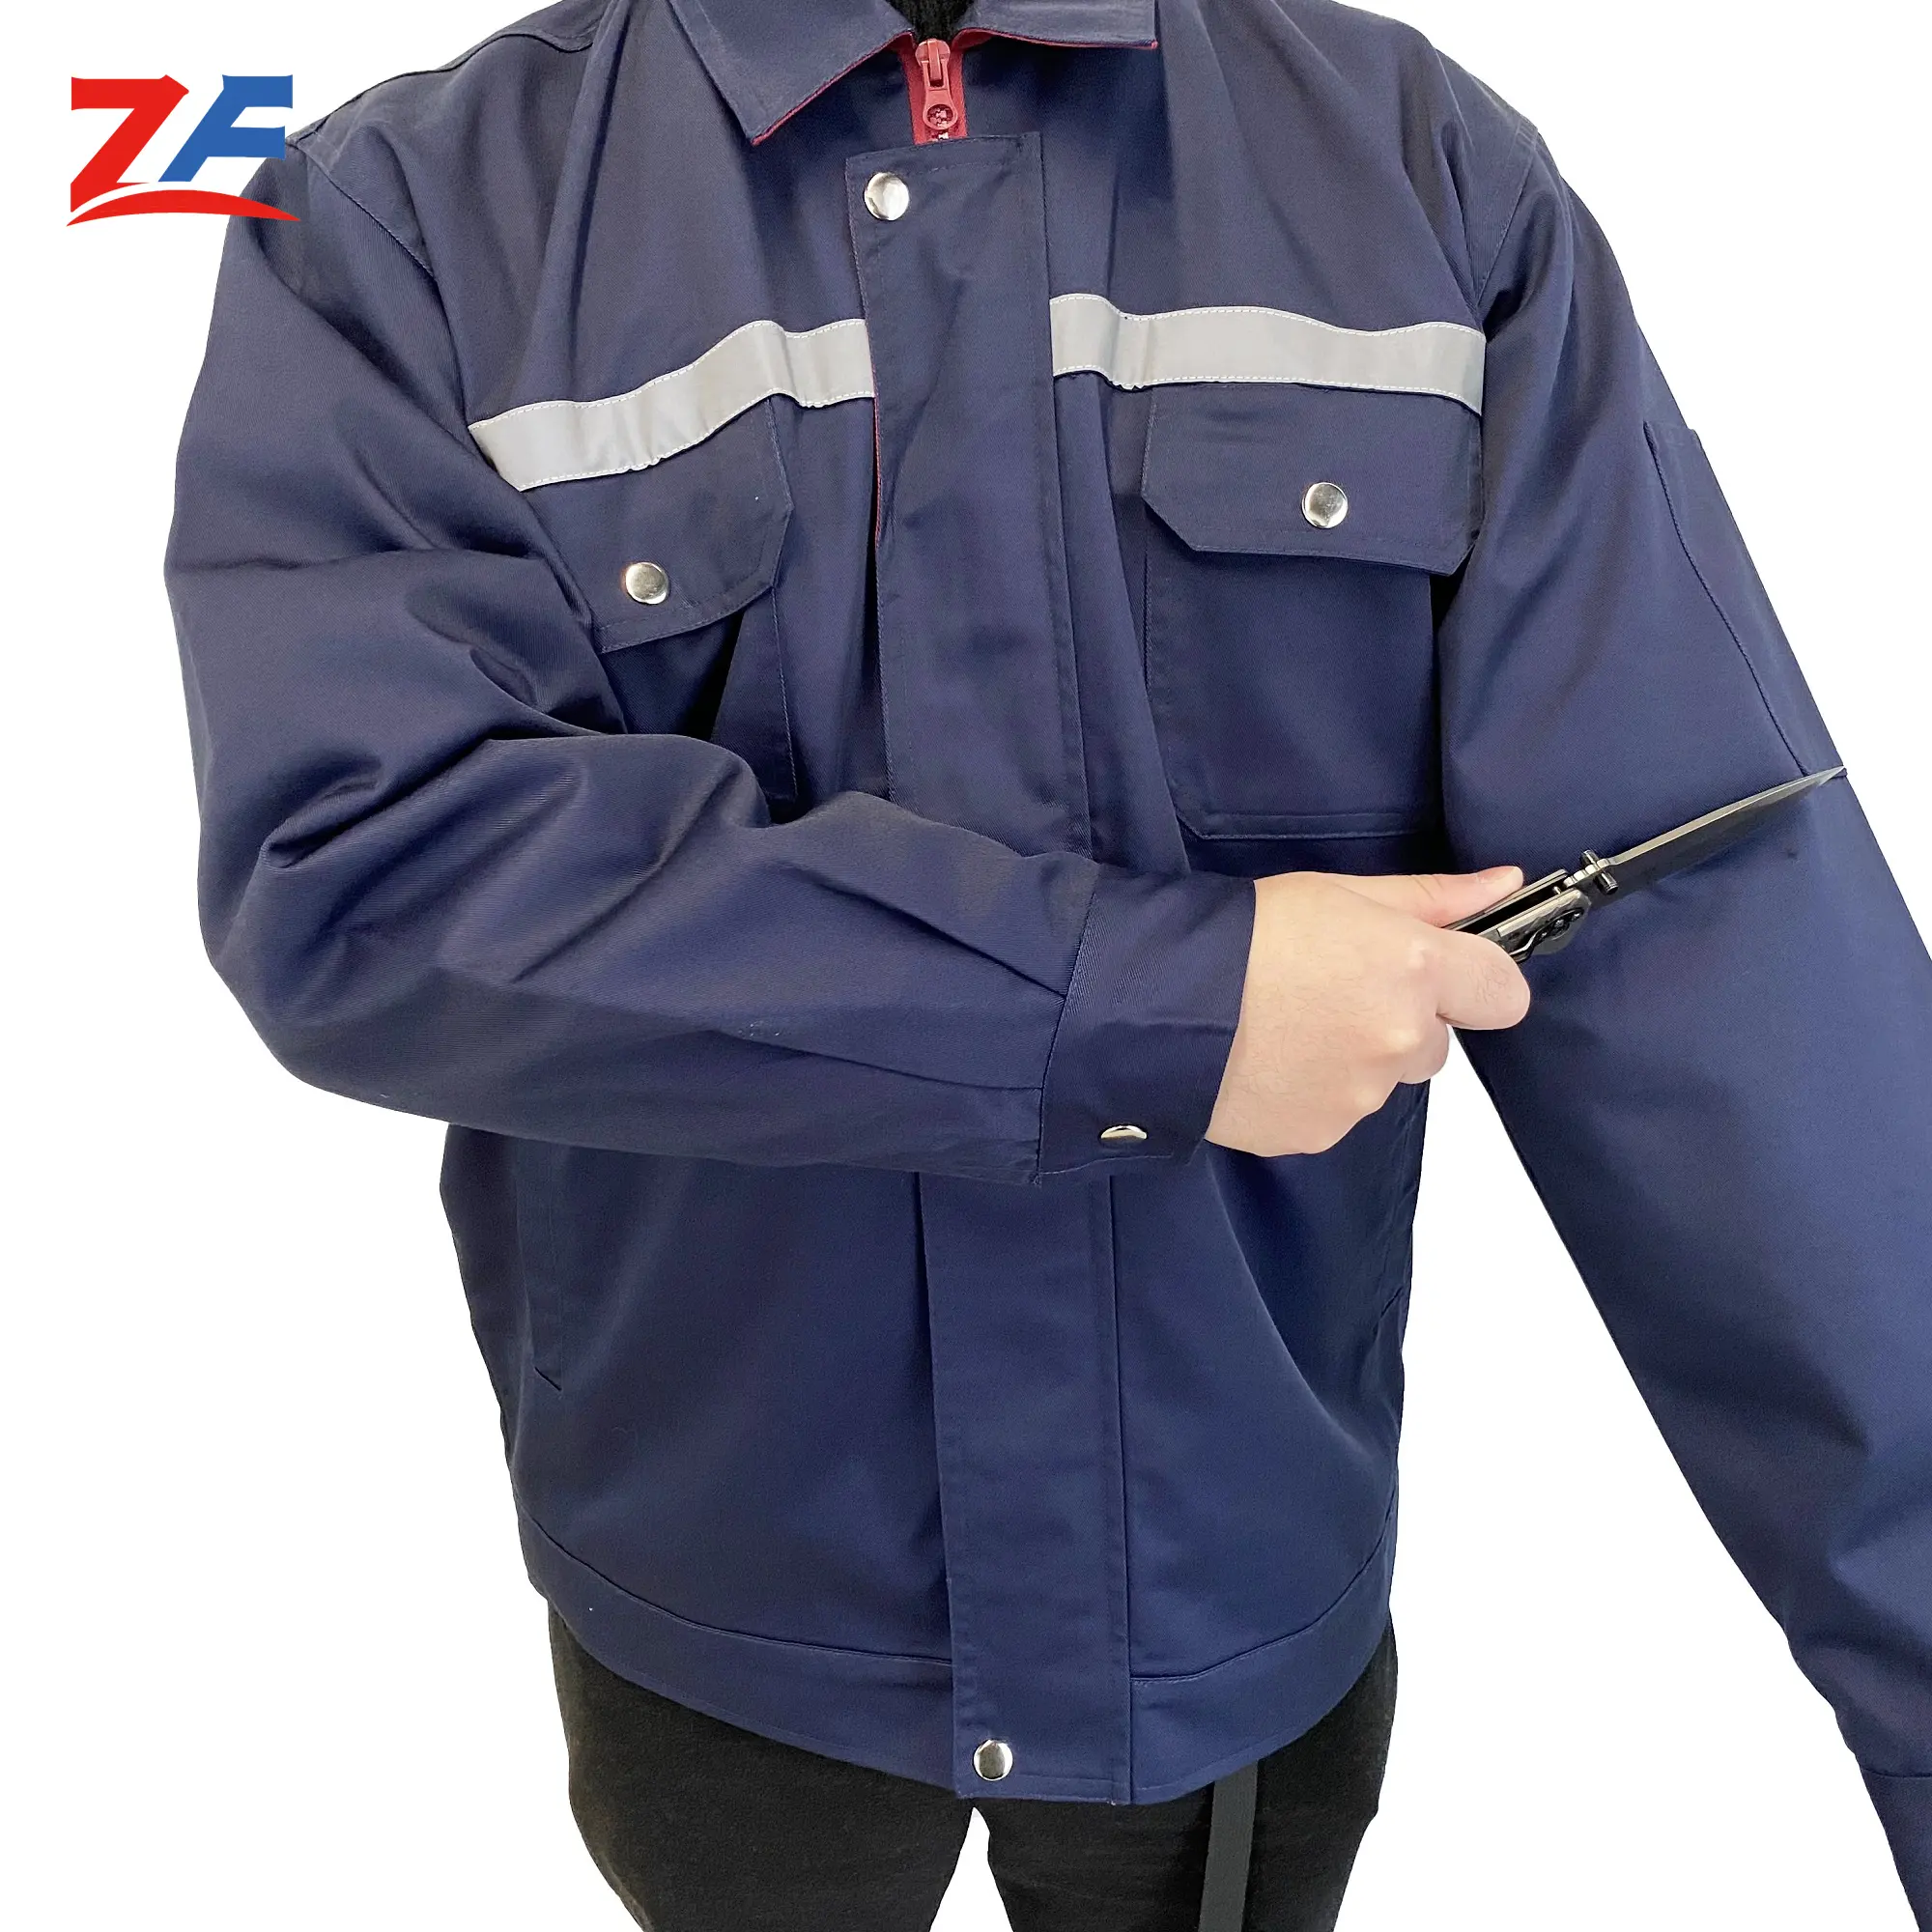 Glass factory porter work clothes safety clothing steel work uniform factory work clothes